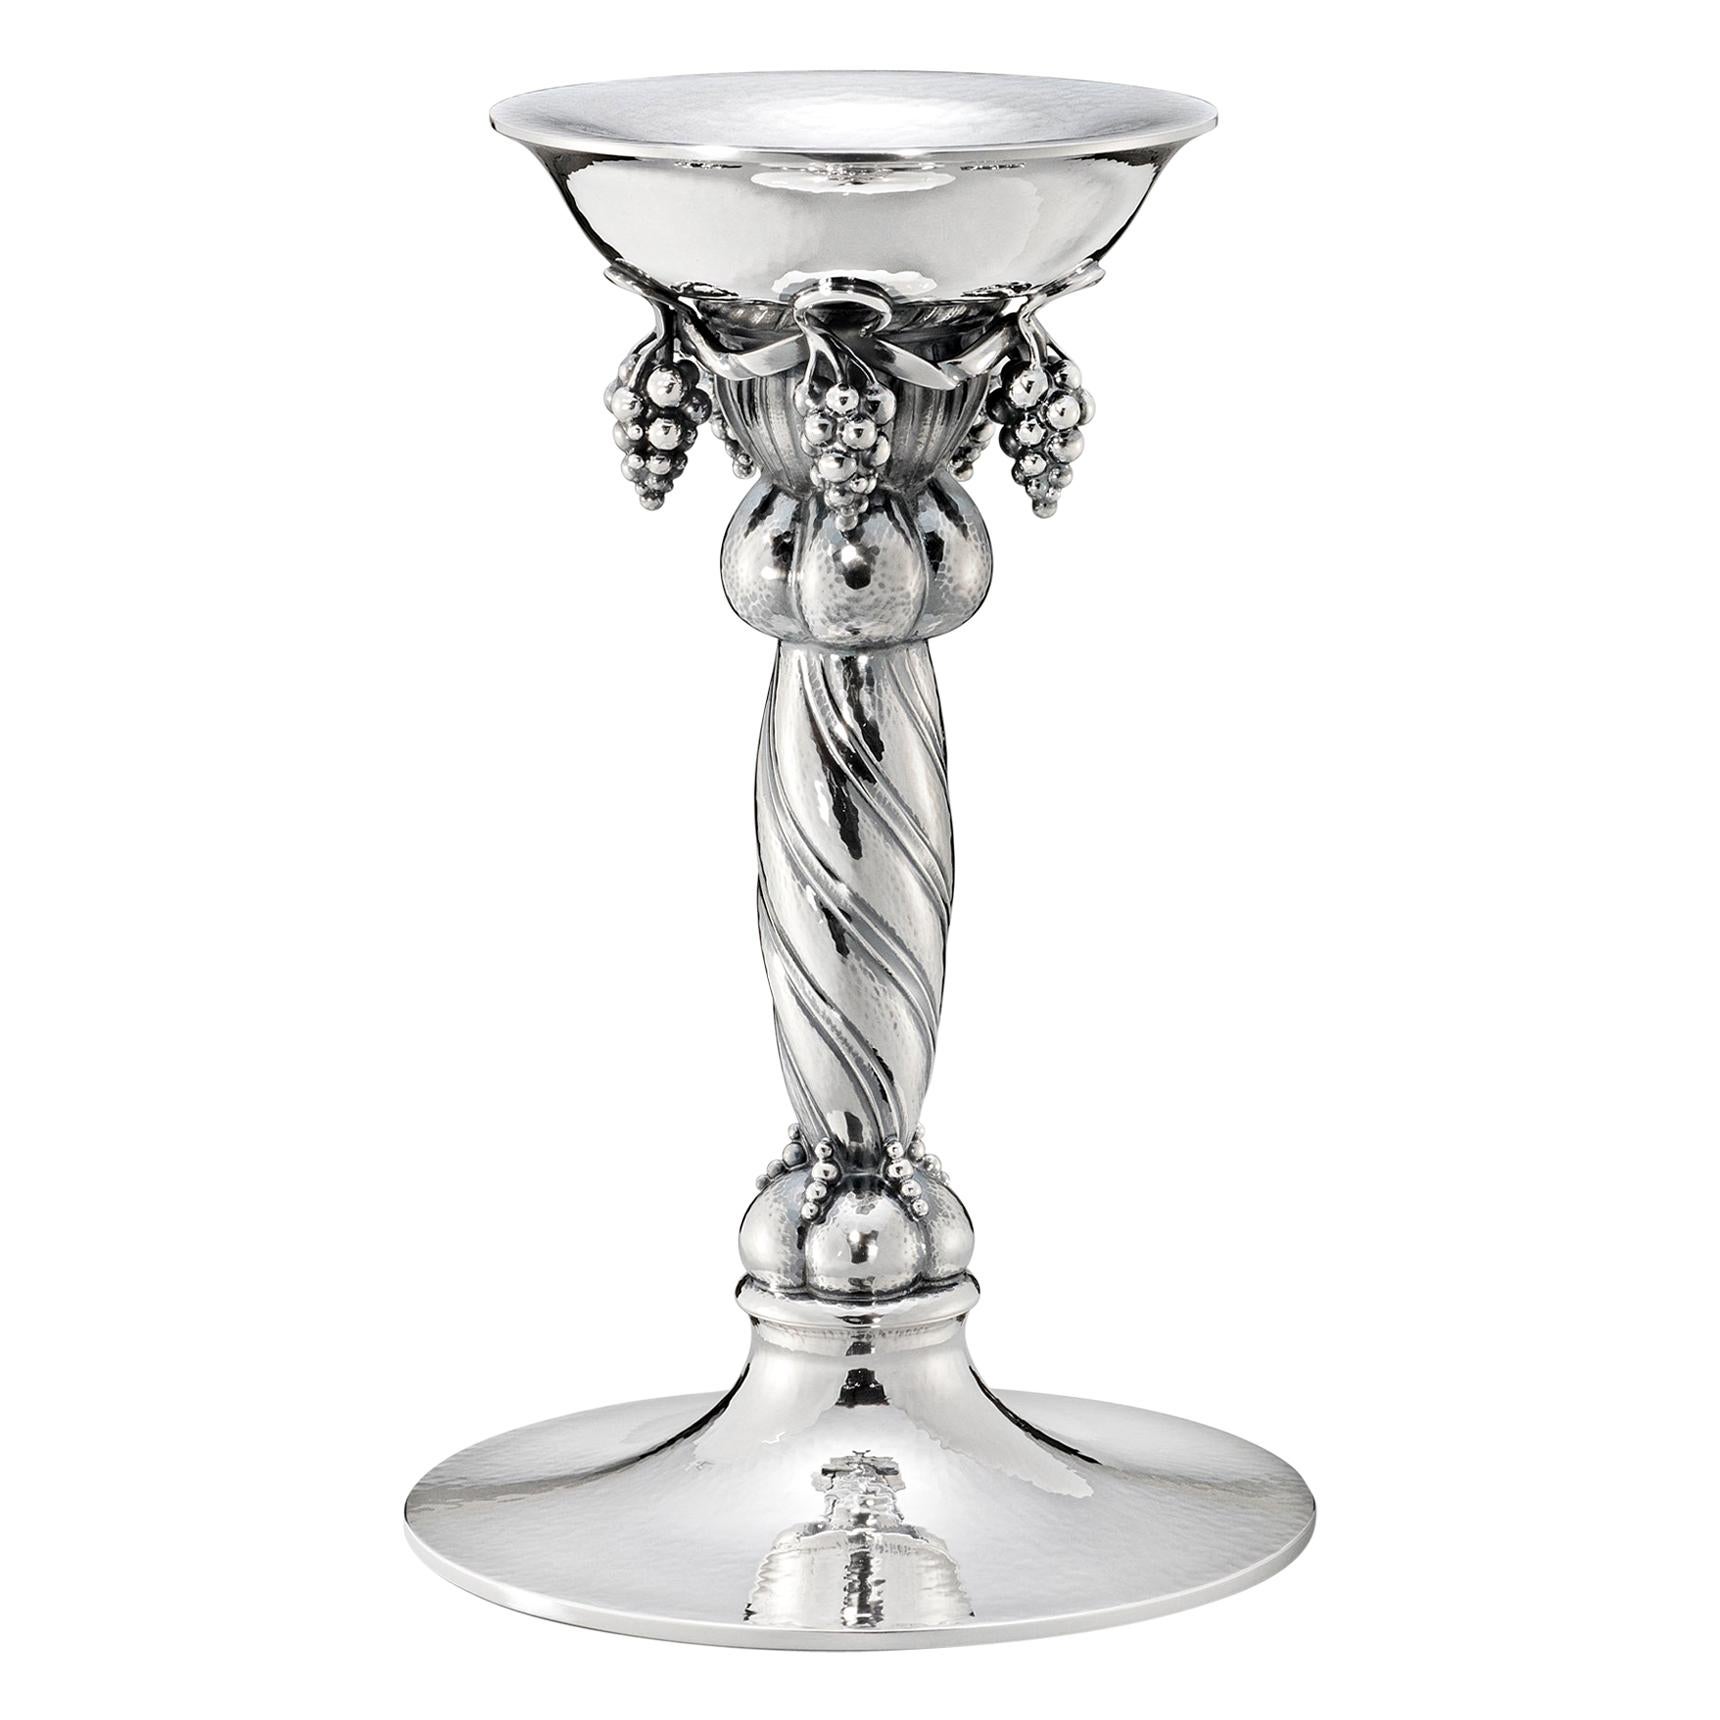 Georg Jensen 263B Handcrafted Sterling Silver Candlestick